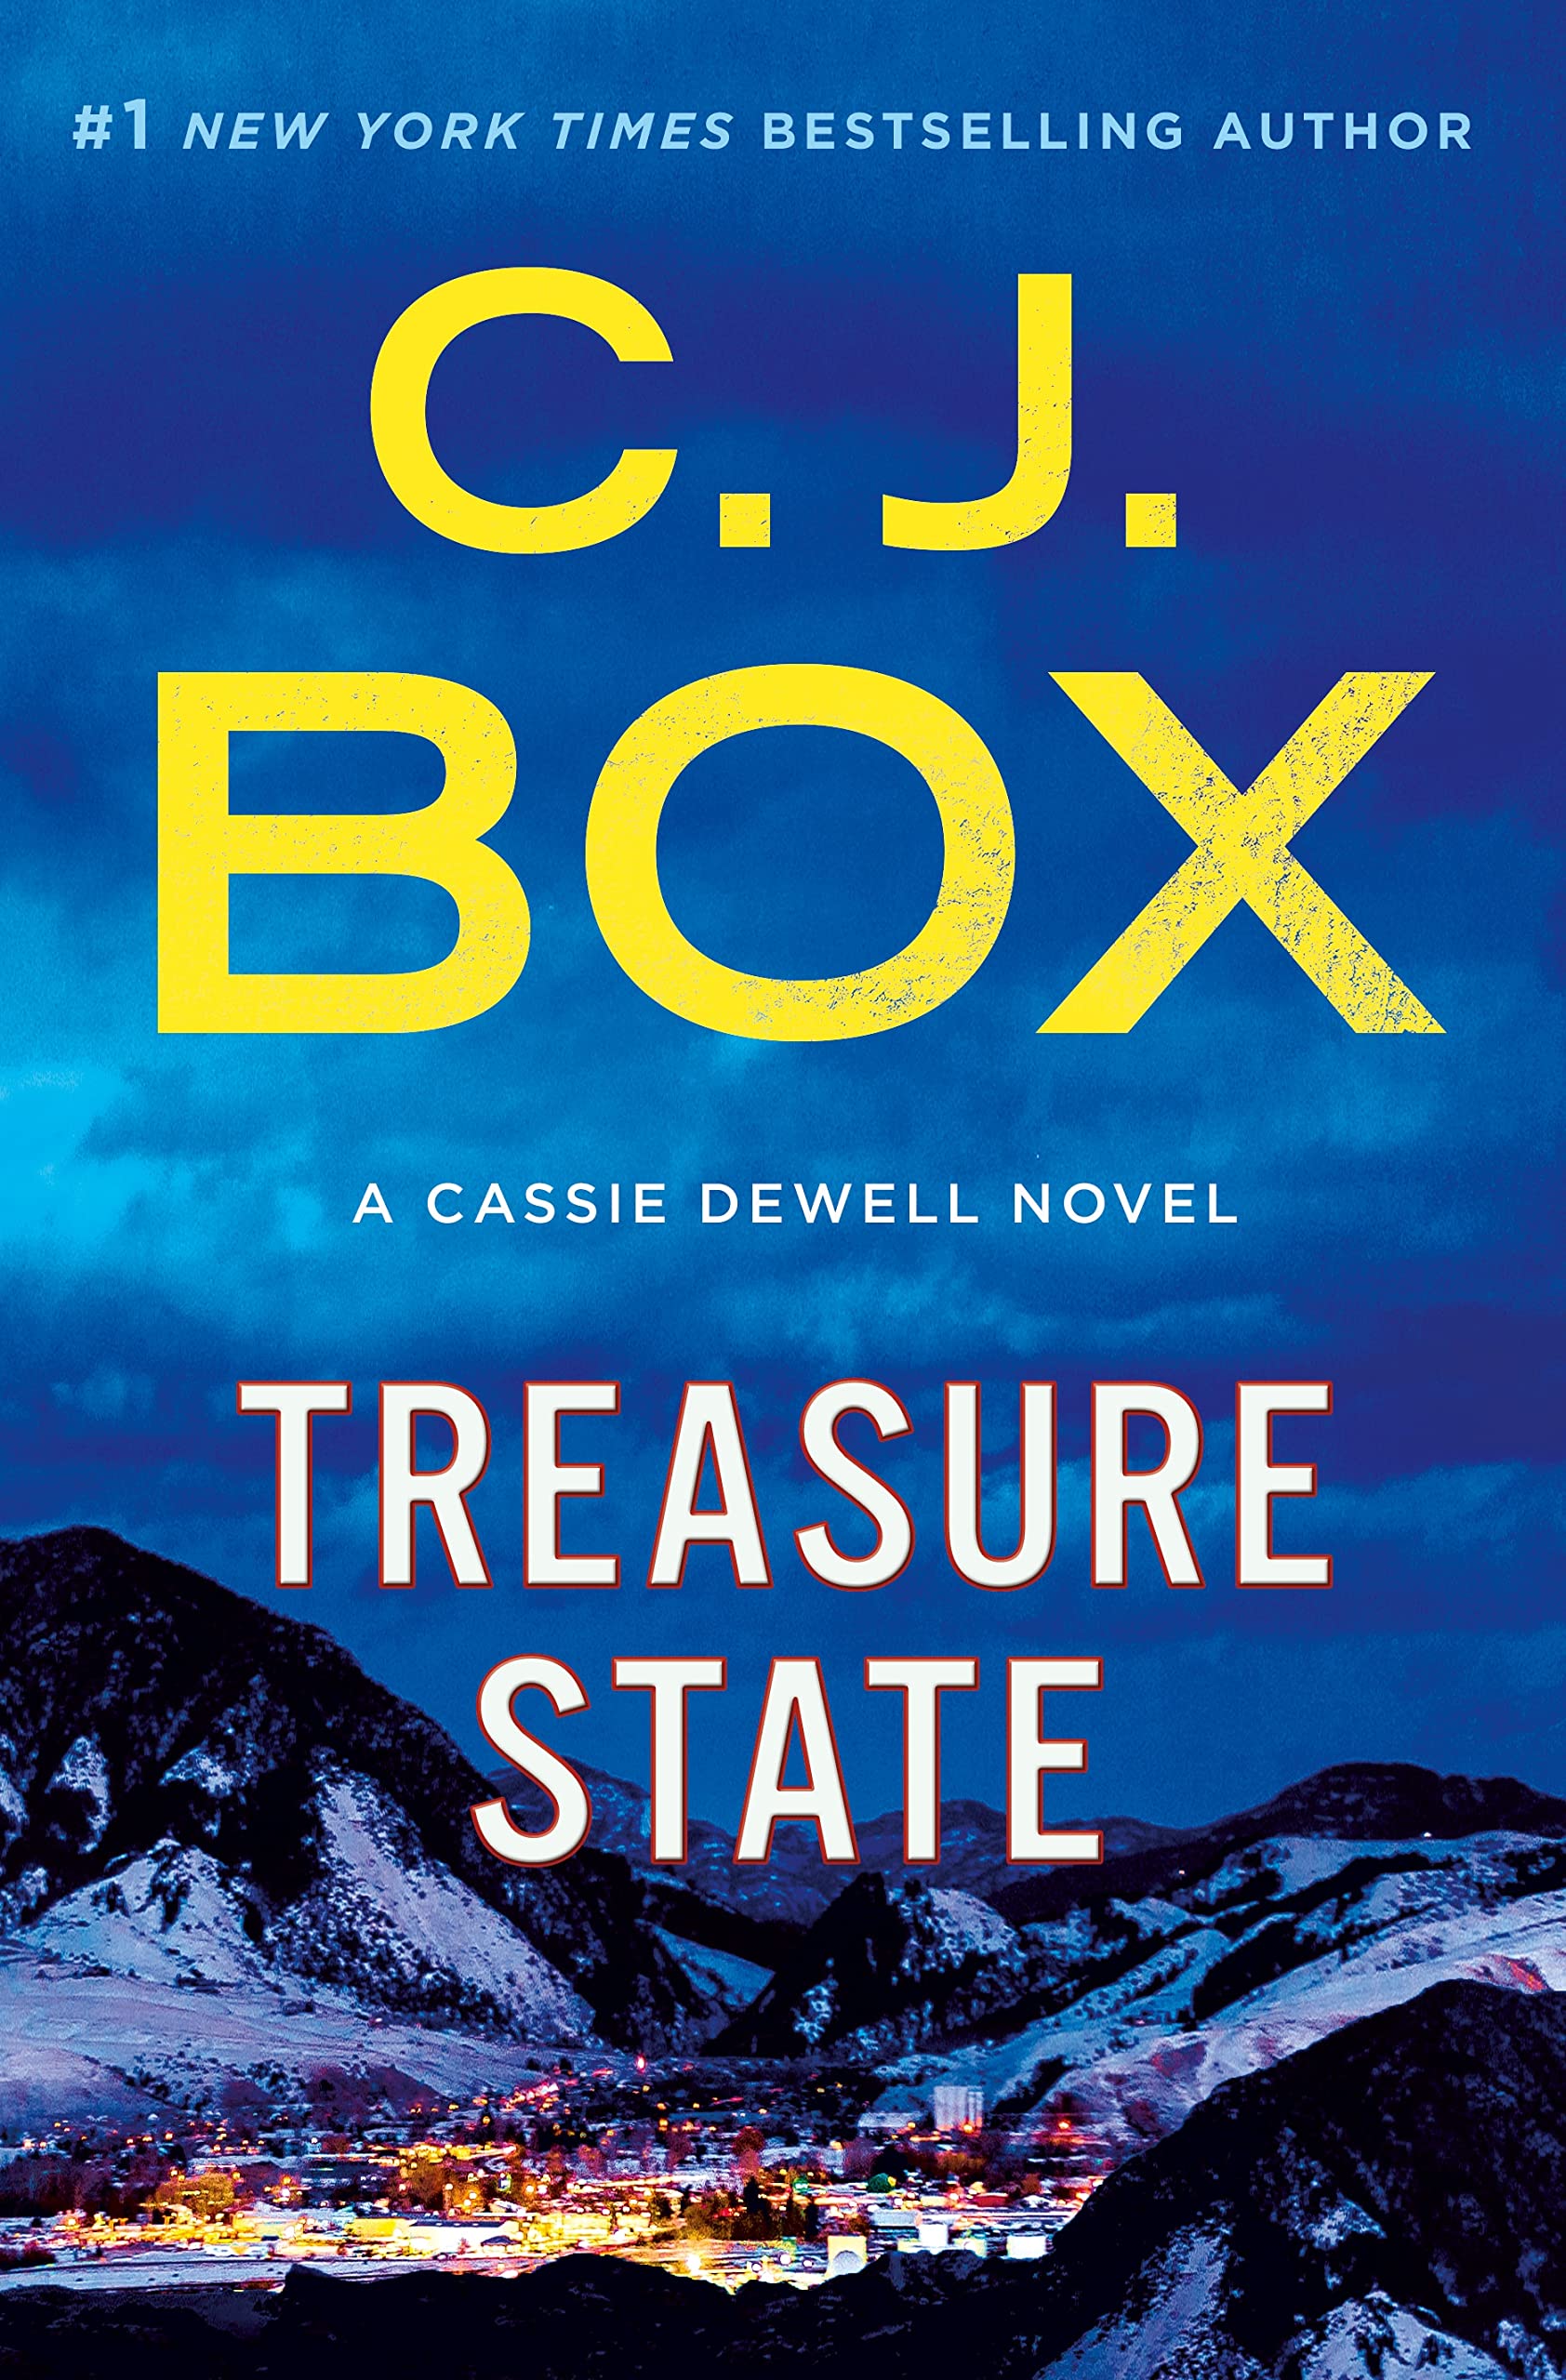 Image for "Treasure State"